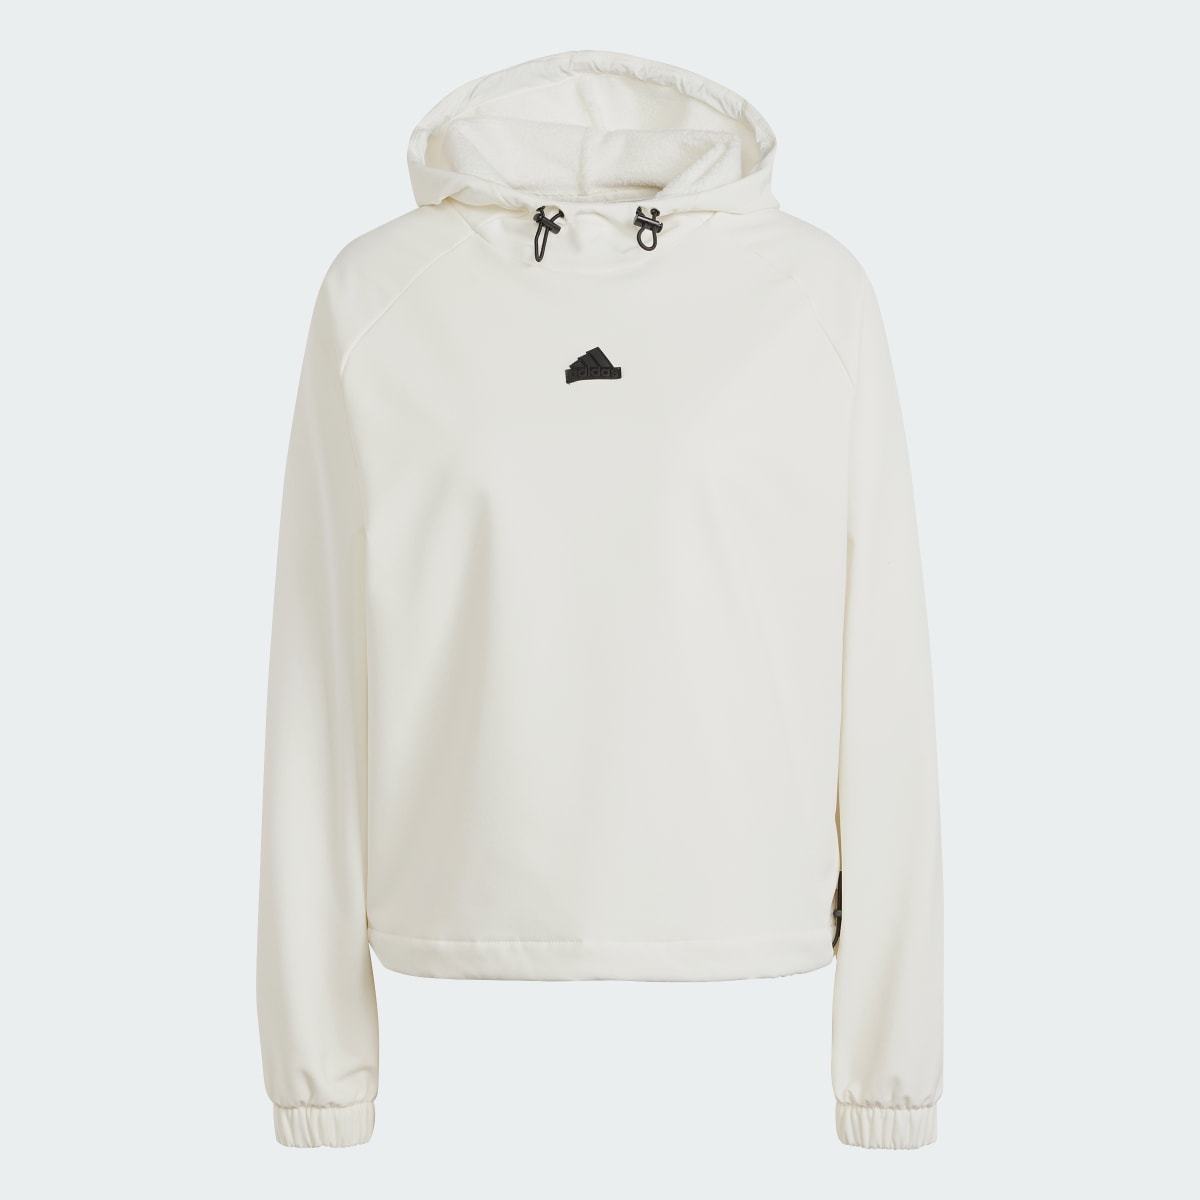 Adidas City Escape Hoodie With Bungee Cord. 5